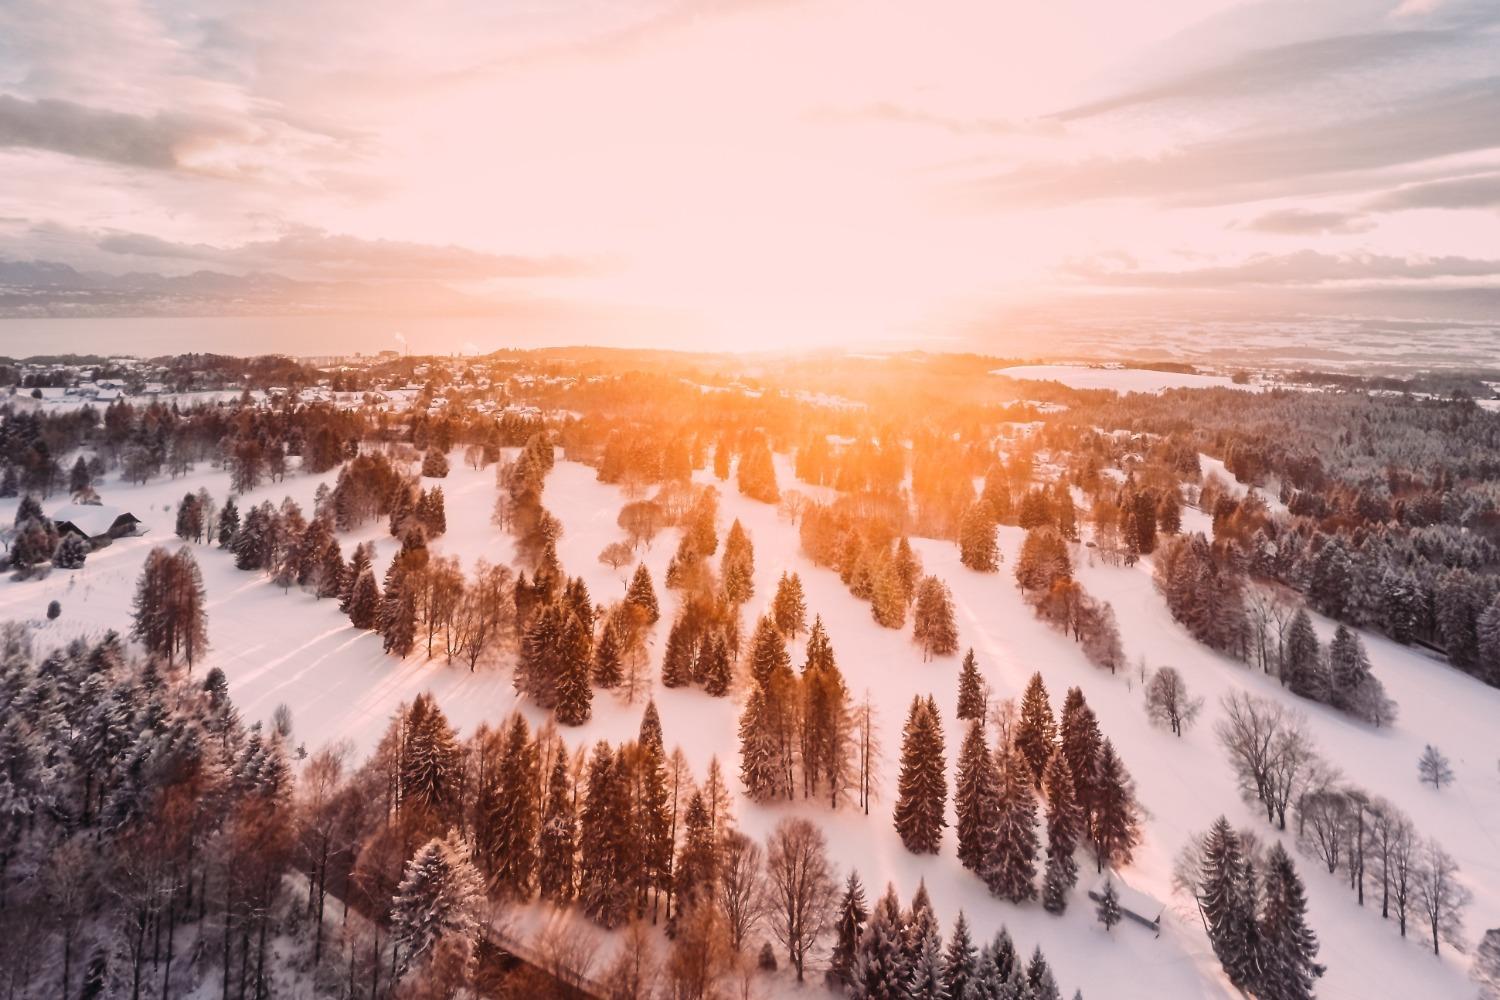 Sunrise over a winter forest